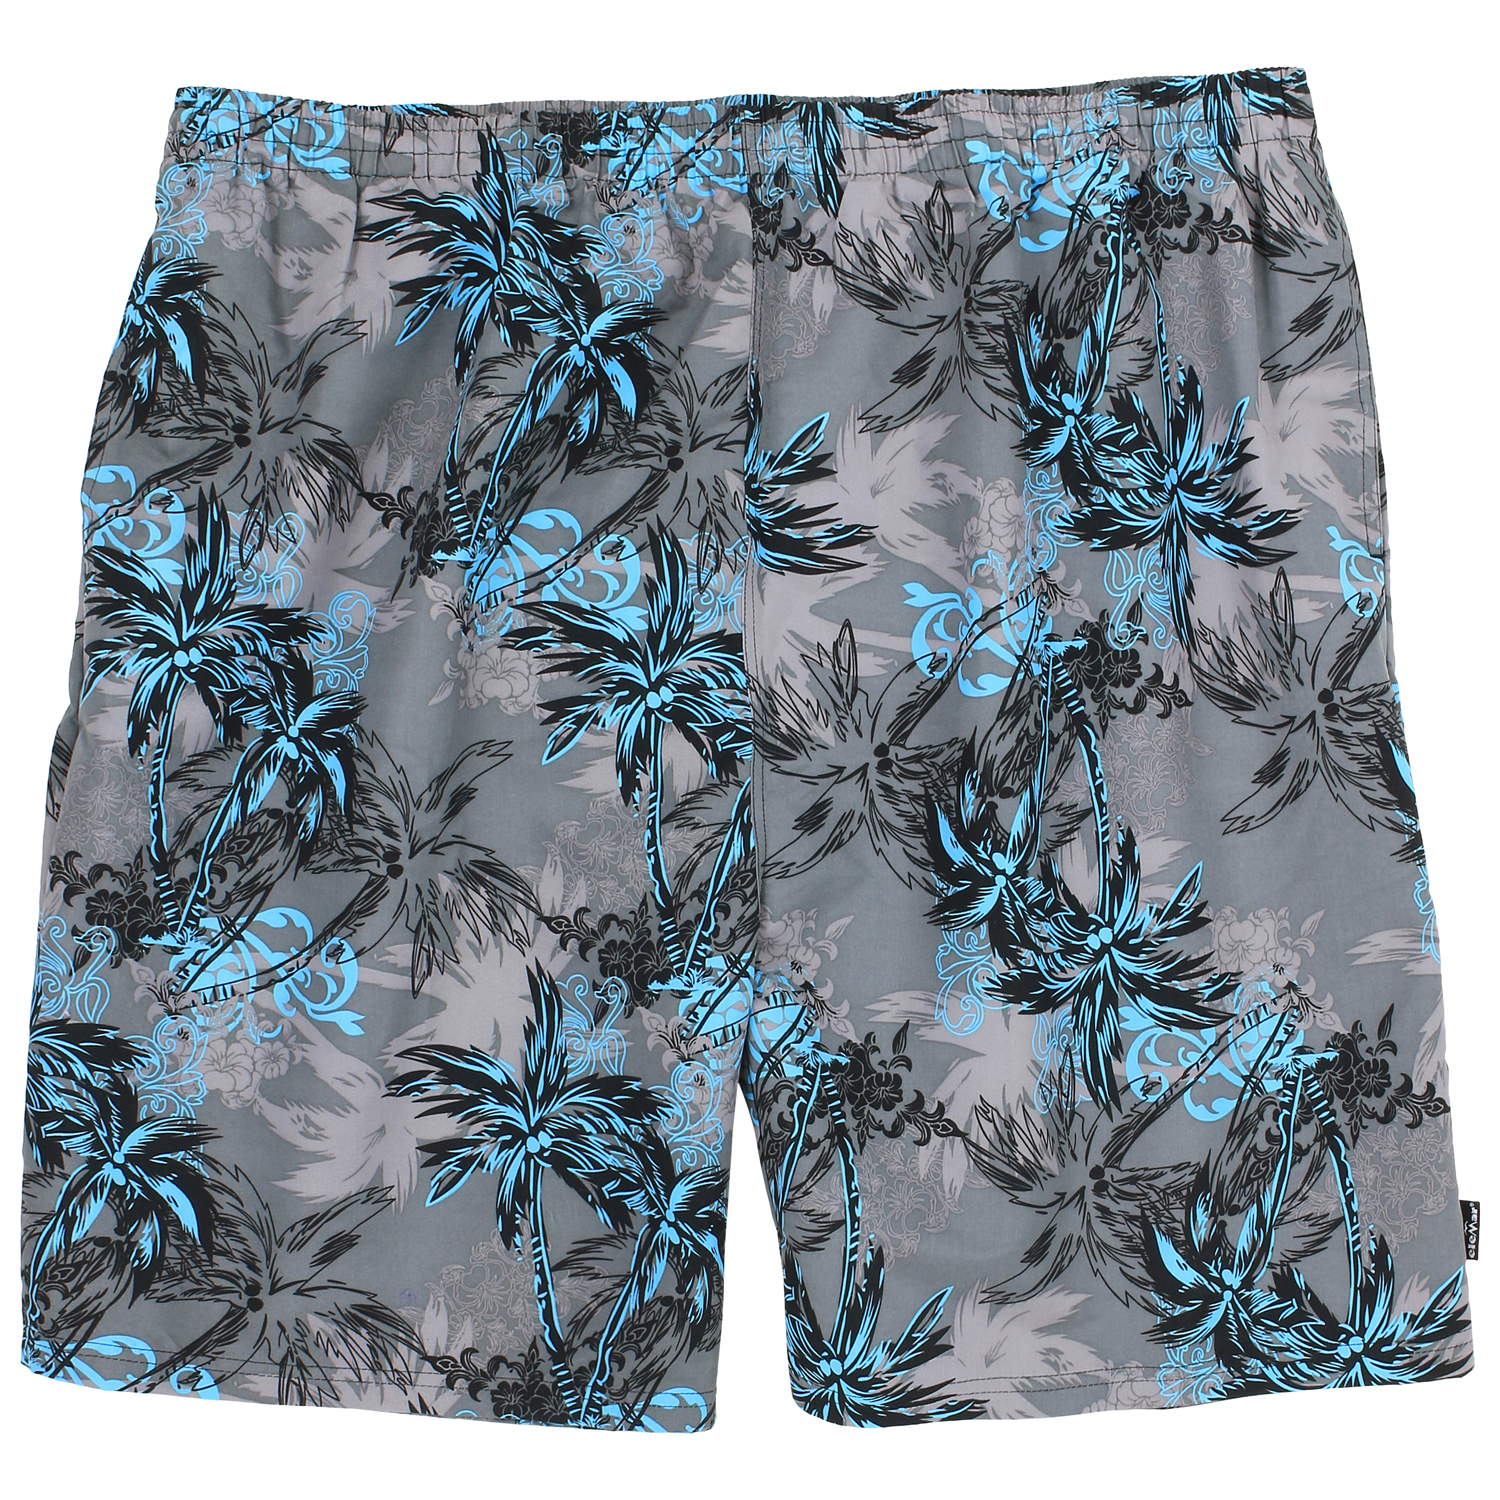 Swim bermuda by eleMar for men grey with palm tree pattern in oversizes up to 8XL